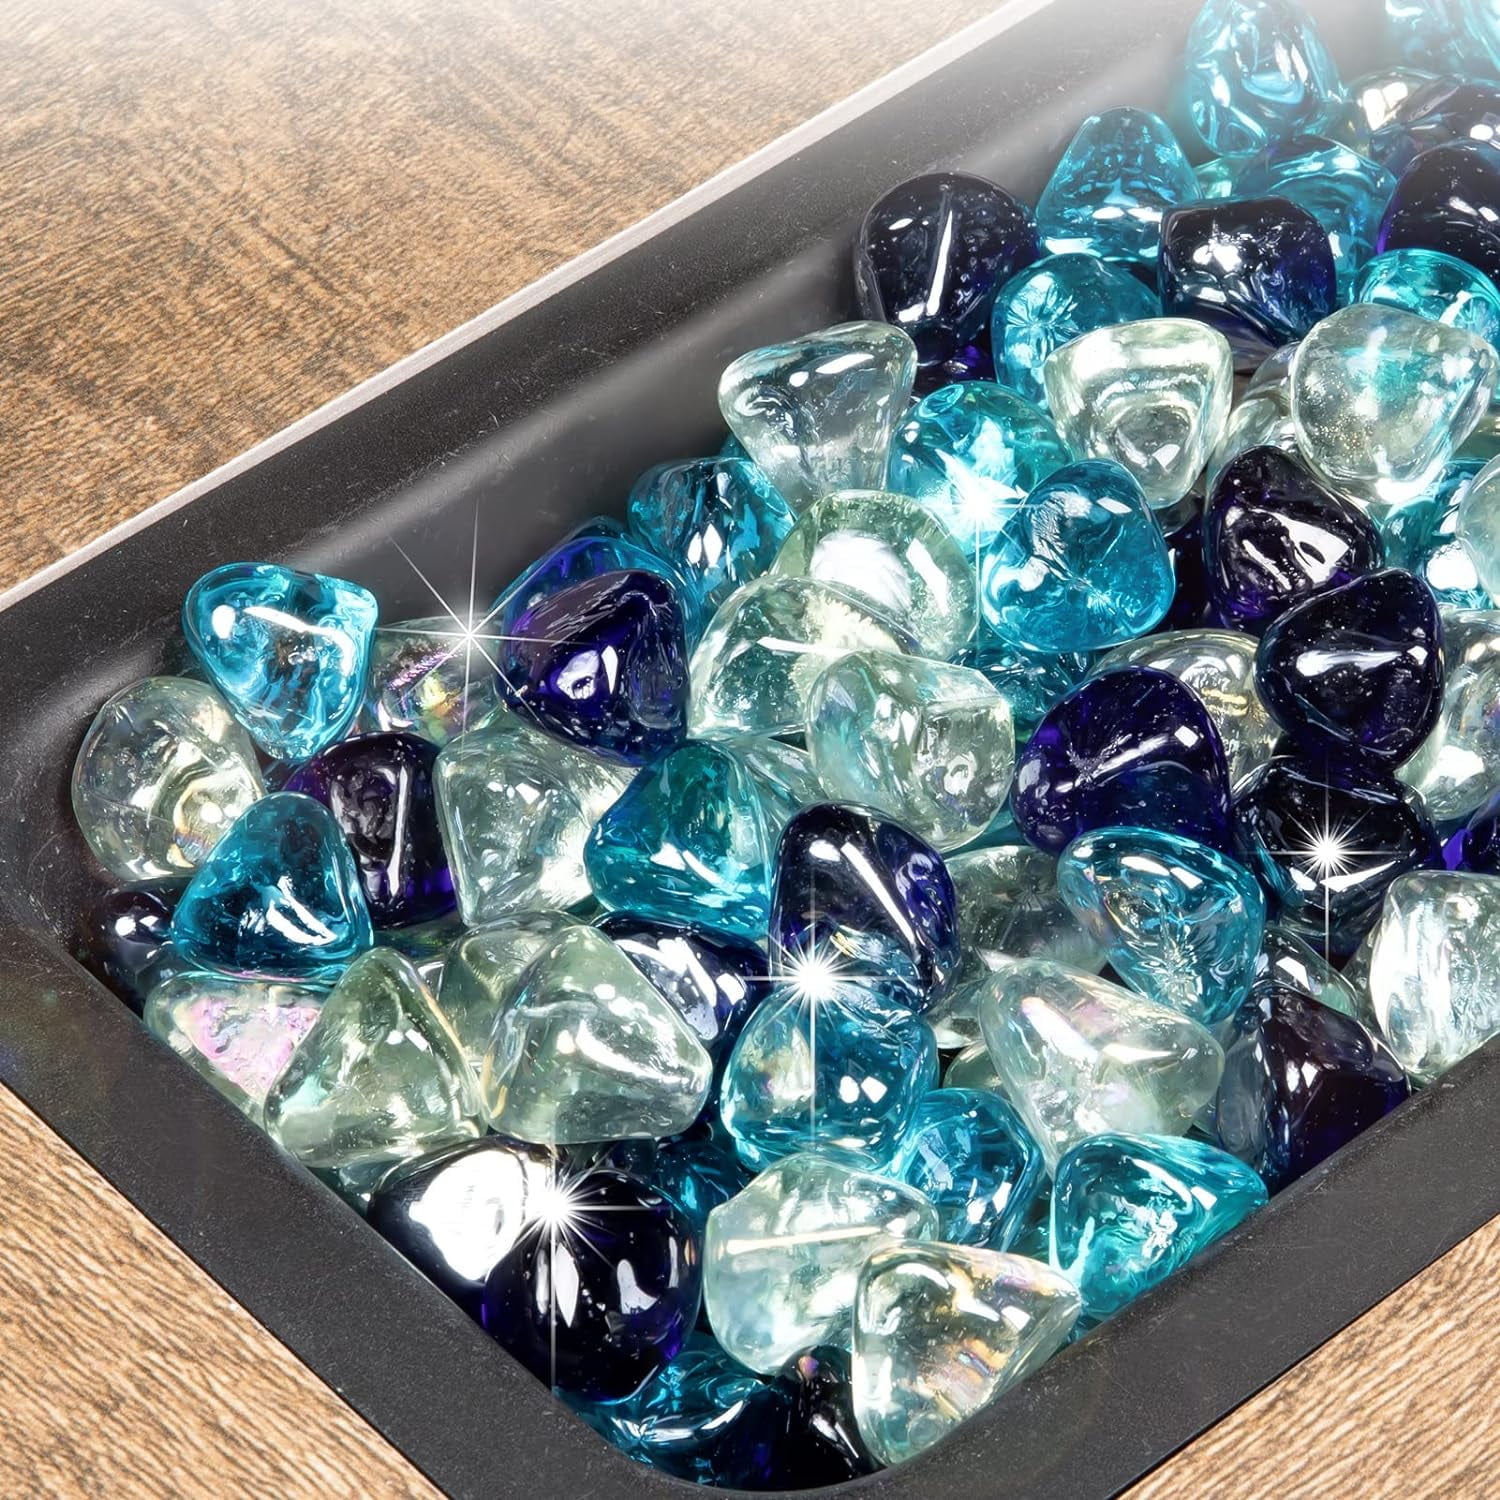 Lechloris Blue Mixed Flat Glass Marbles (2Ib Pack),Flat Glass Beads for  Vases, Glass Gemstones - Vase Filler, Aquariums, Fire Glass Beads for Fire